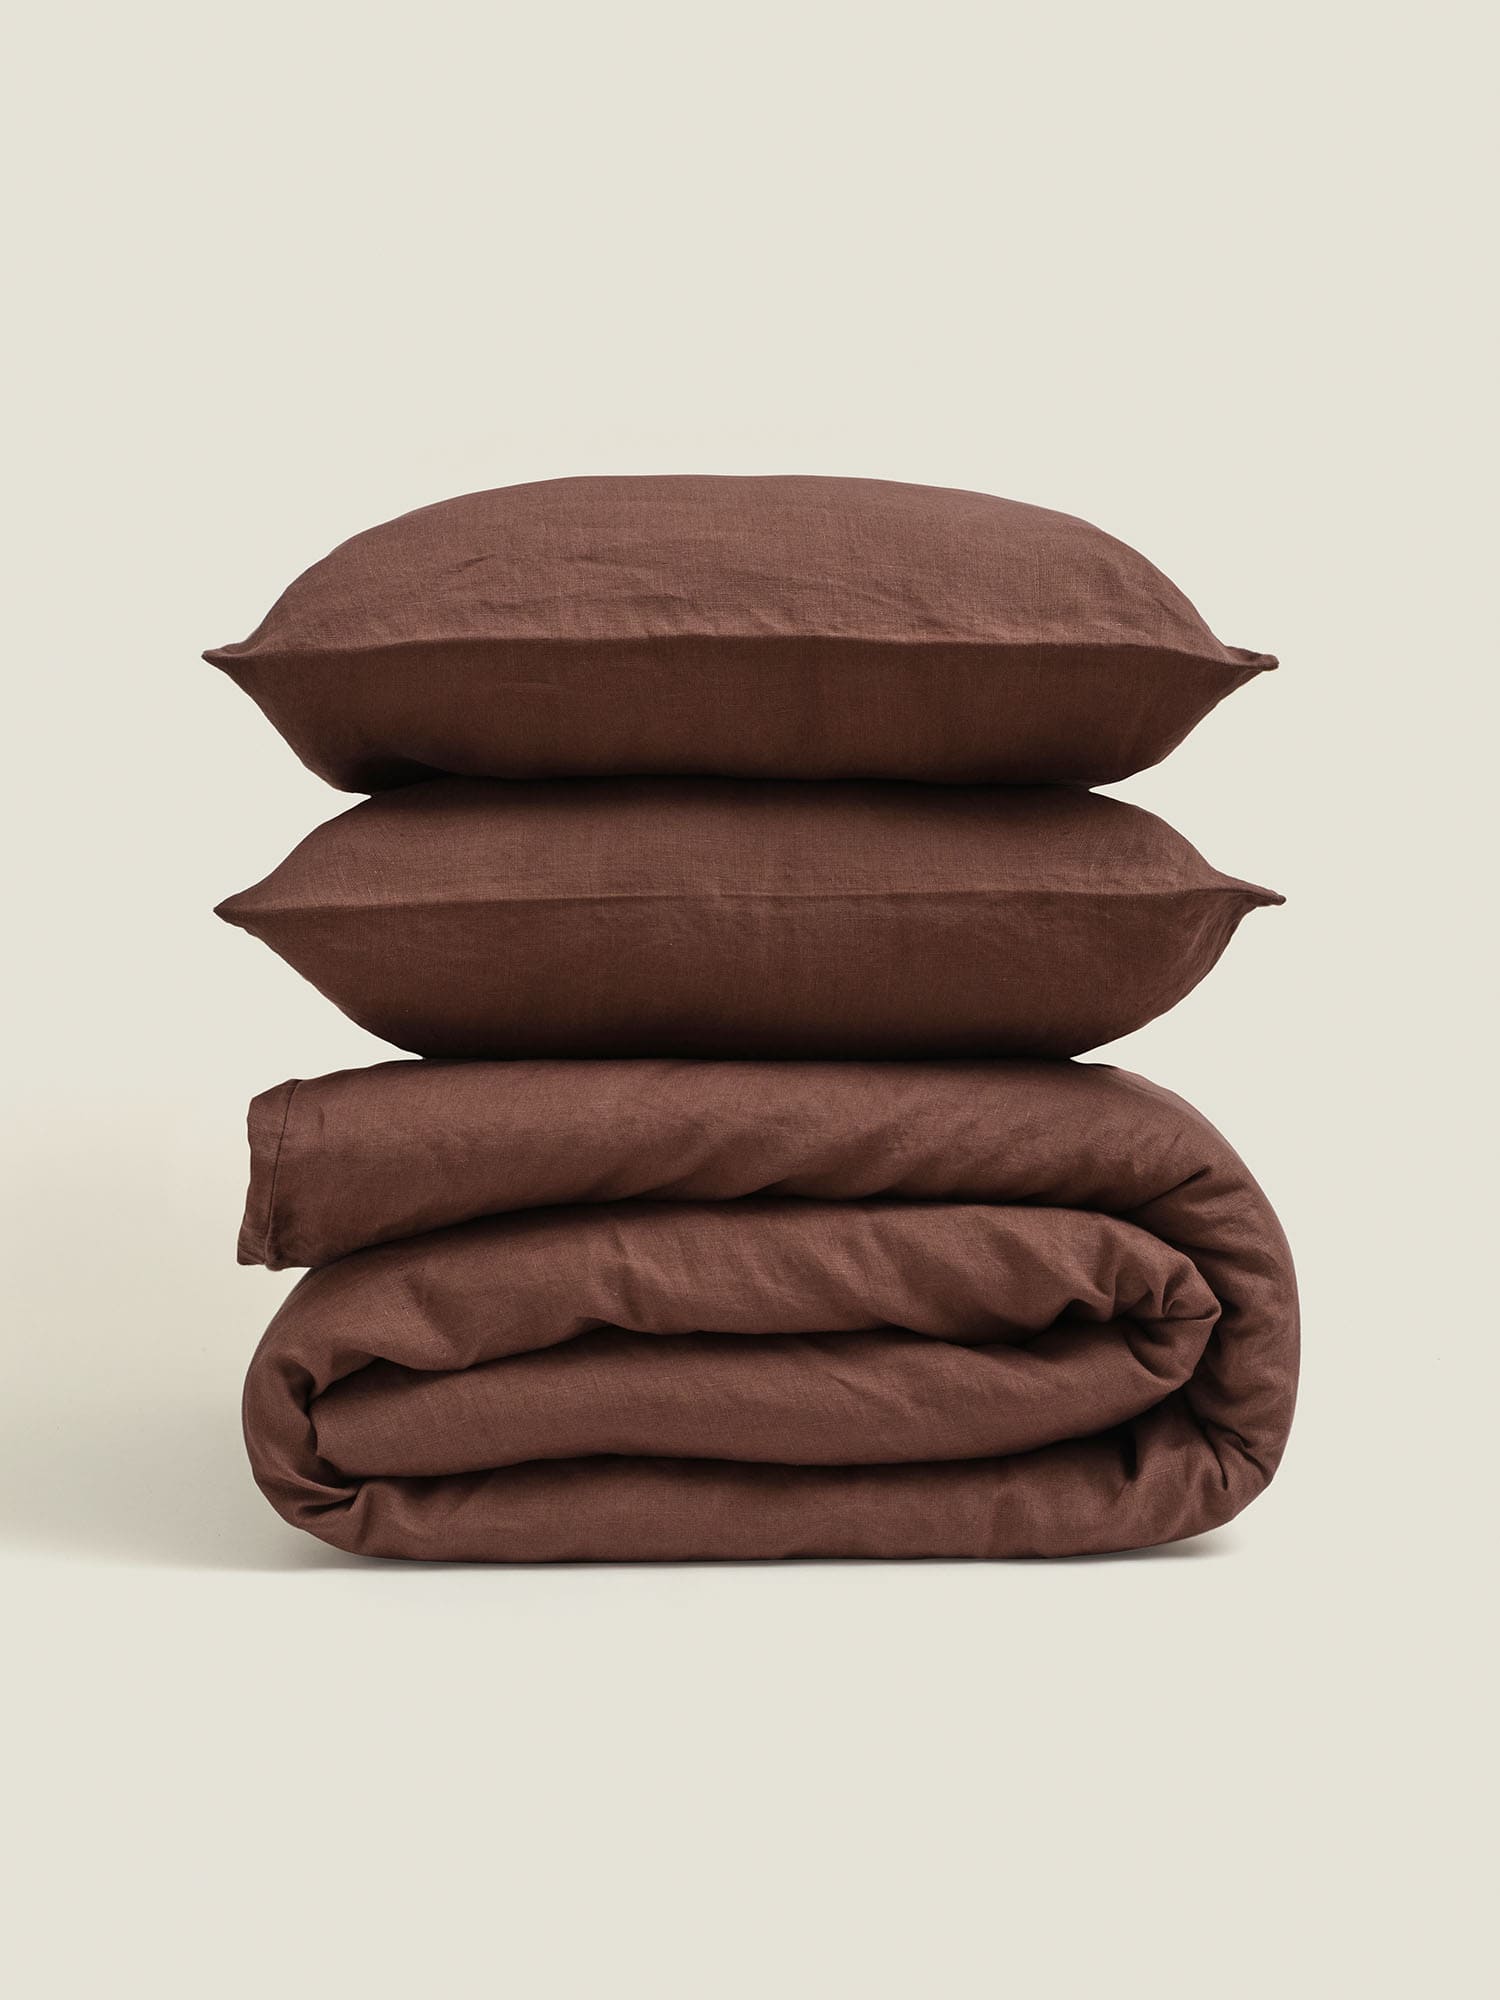 duvet cover in chocolate